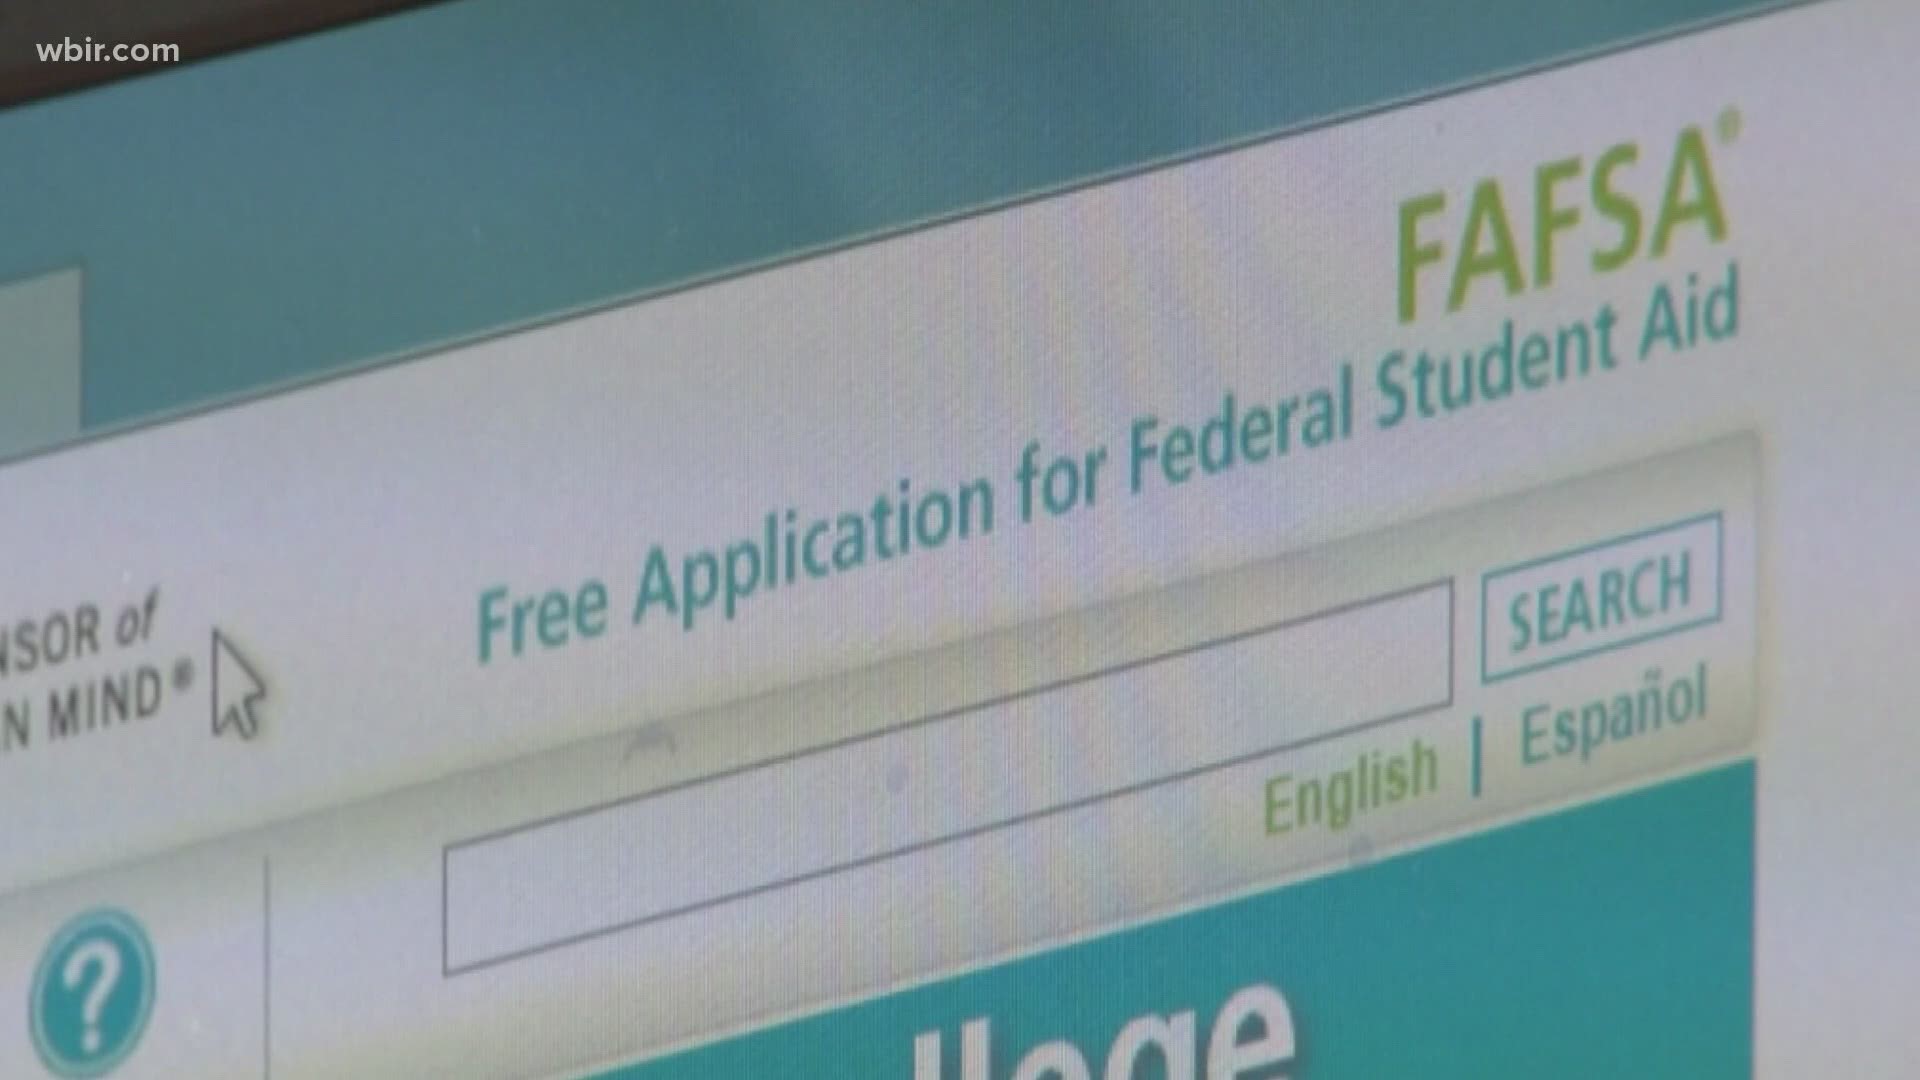 Tuesday, June 30 is the final day to submit your FAFSA application online to receive federal funds for the 2019-2020 school year.